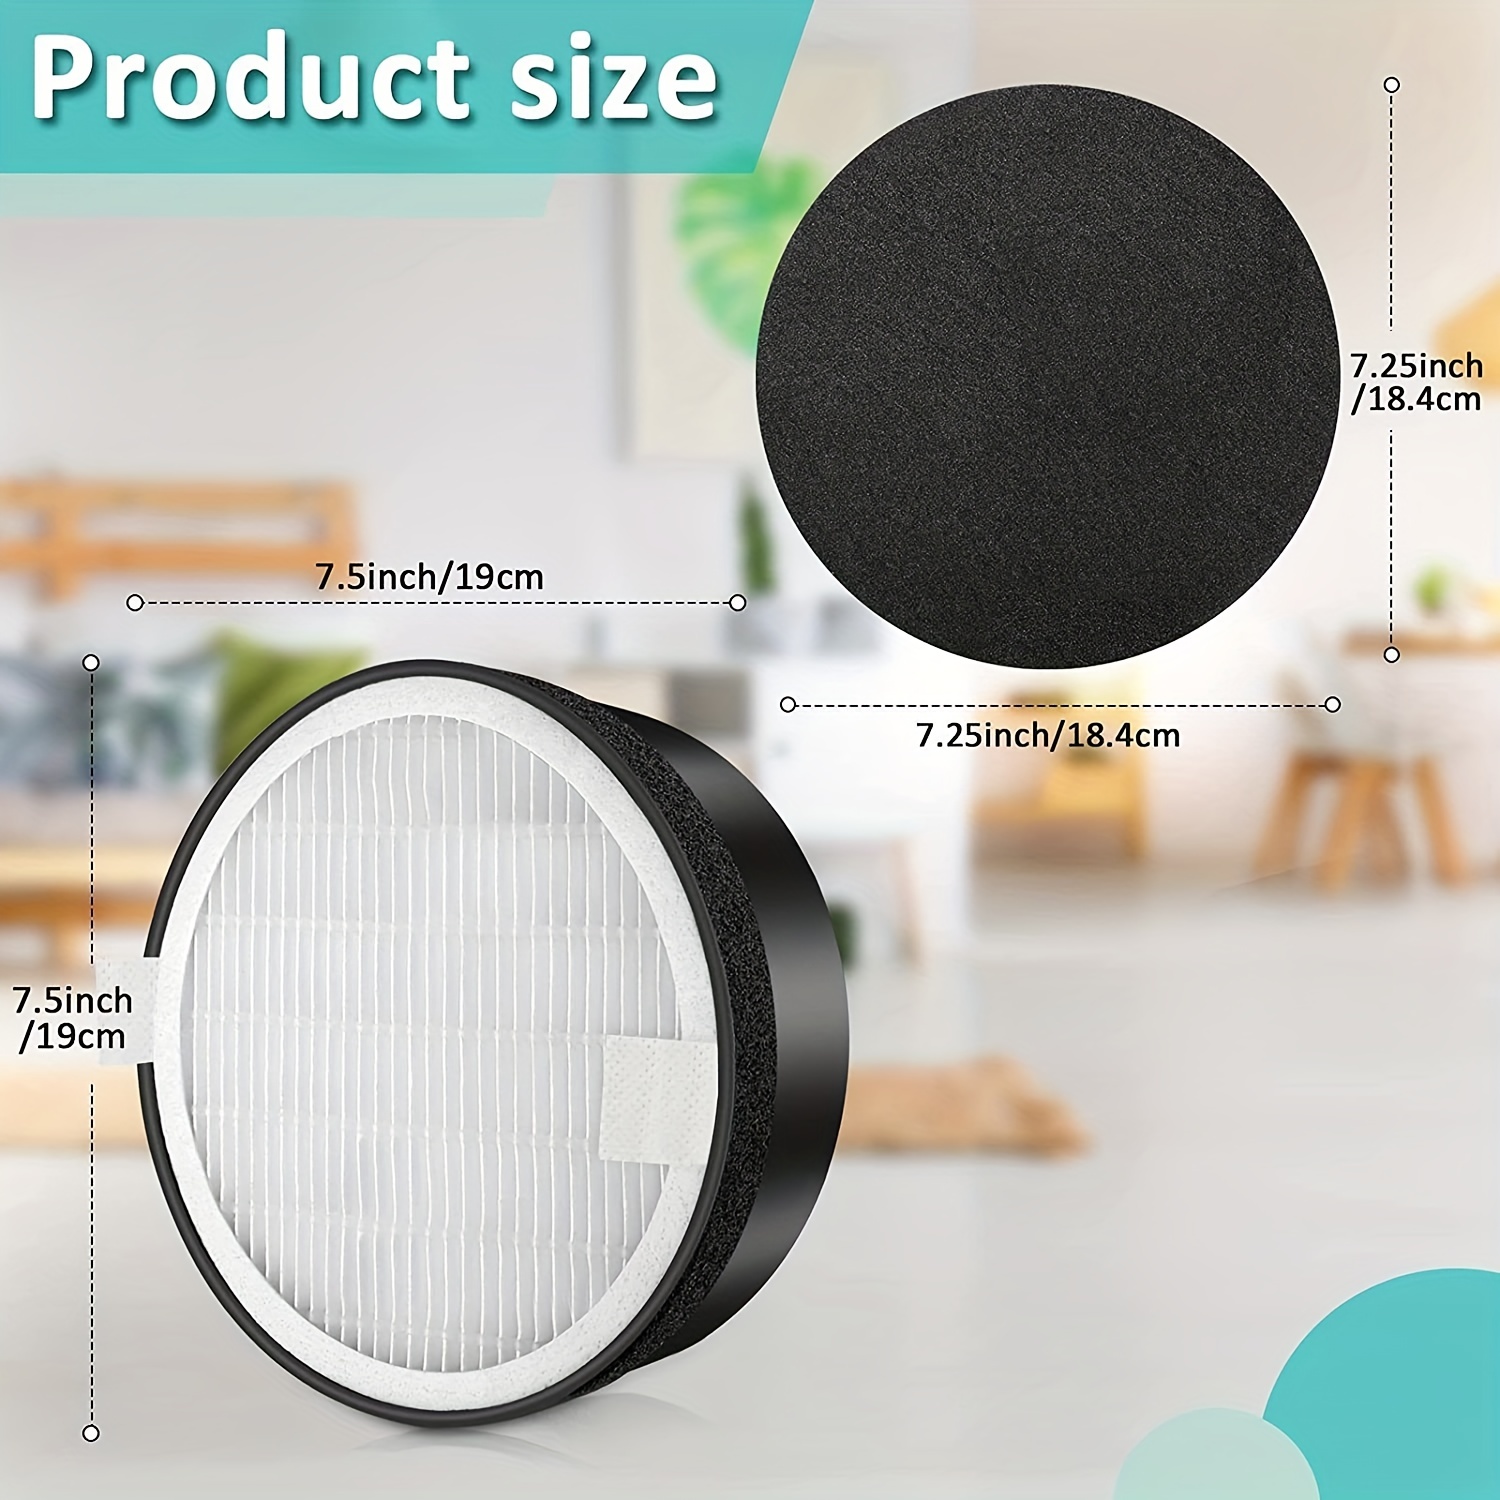 h132 True Hepa Replacement Filter Compatible With Levoit - Temu